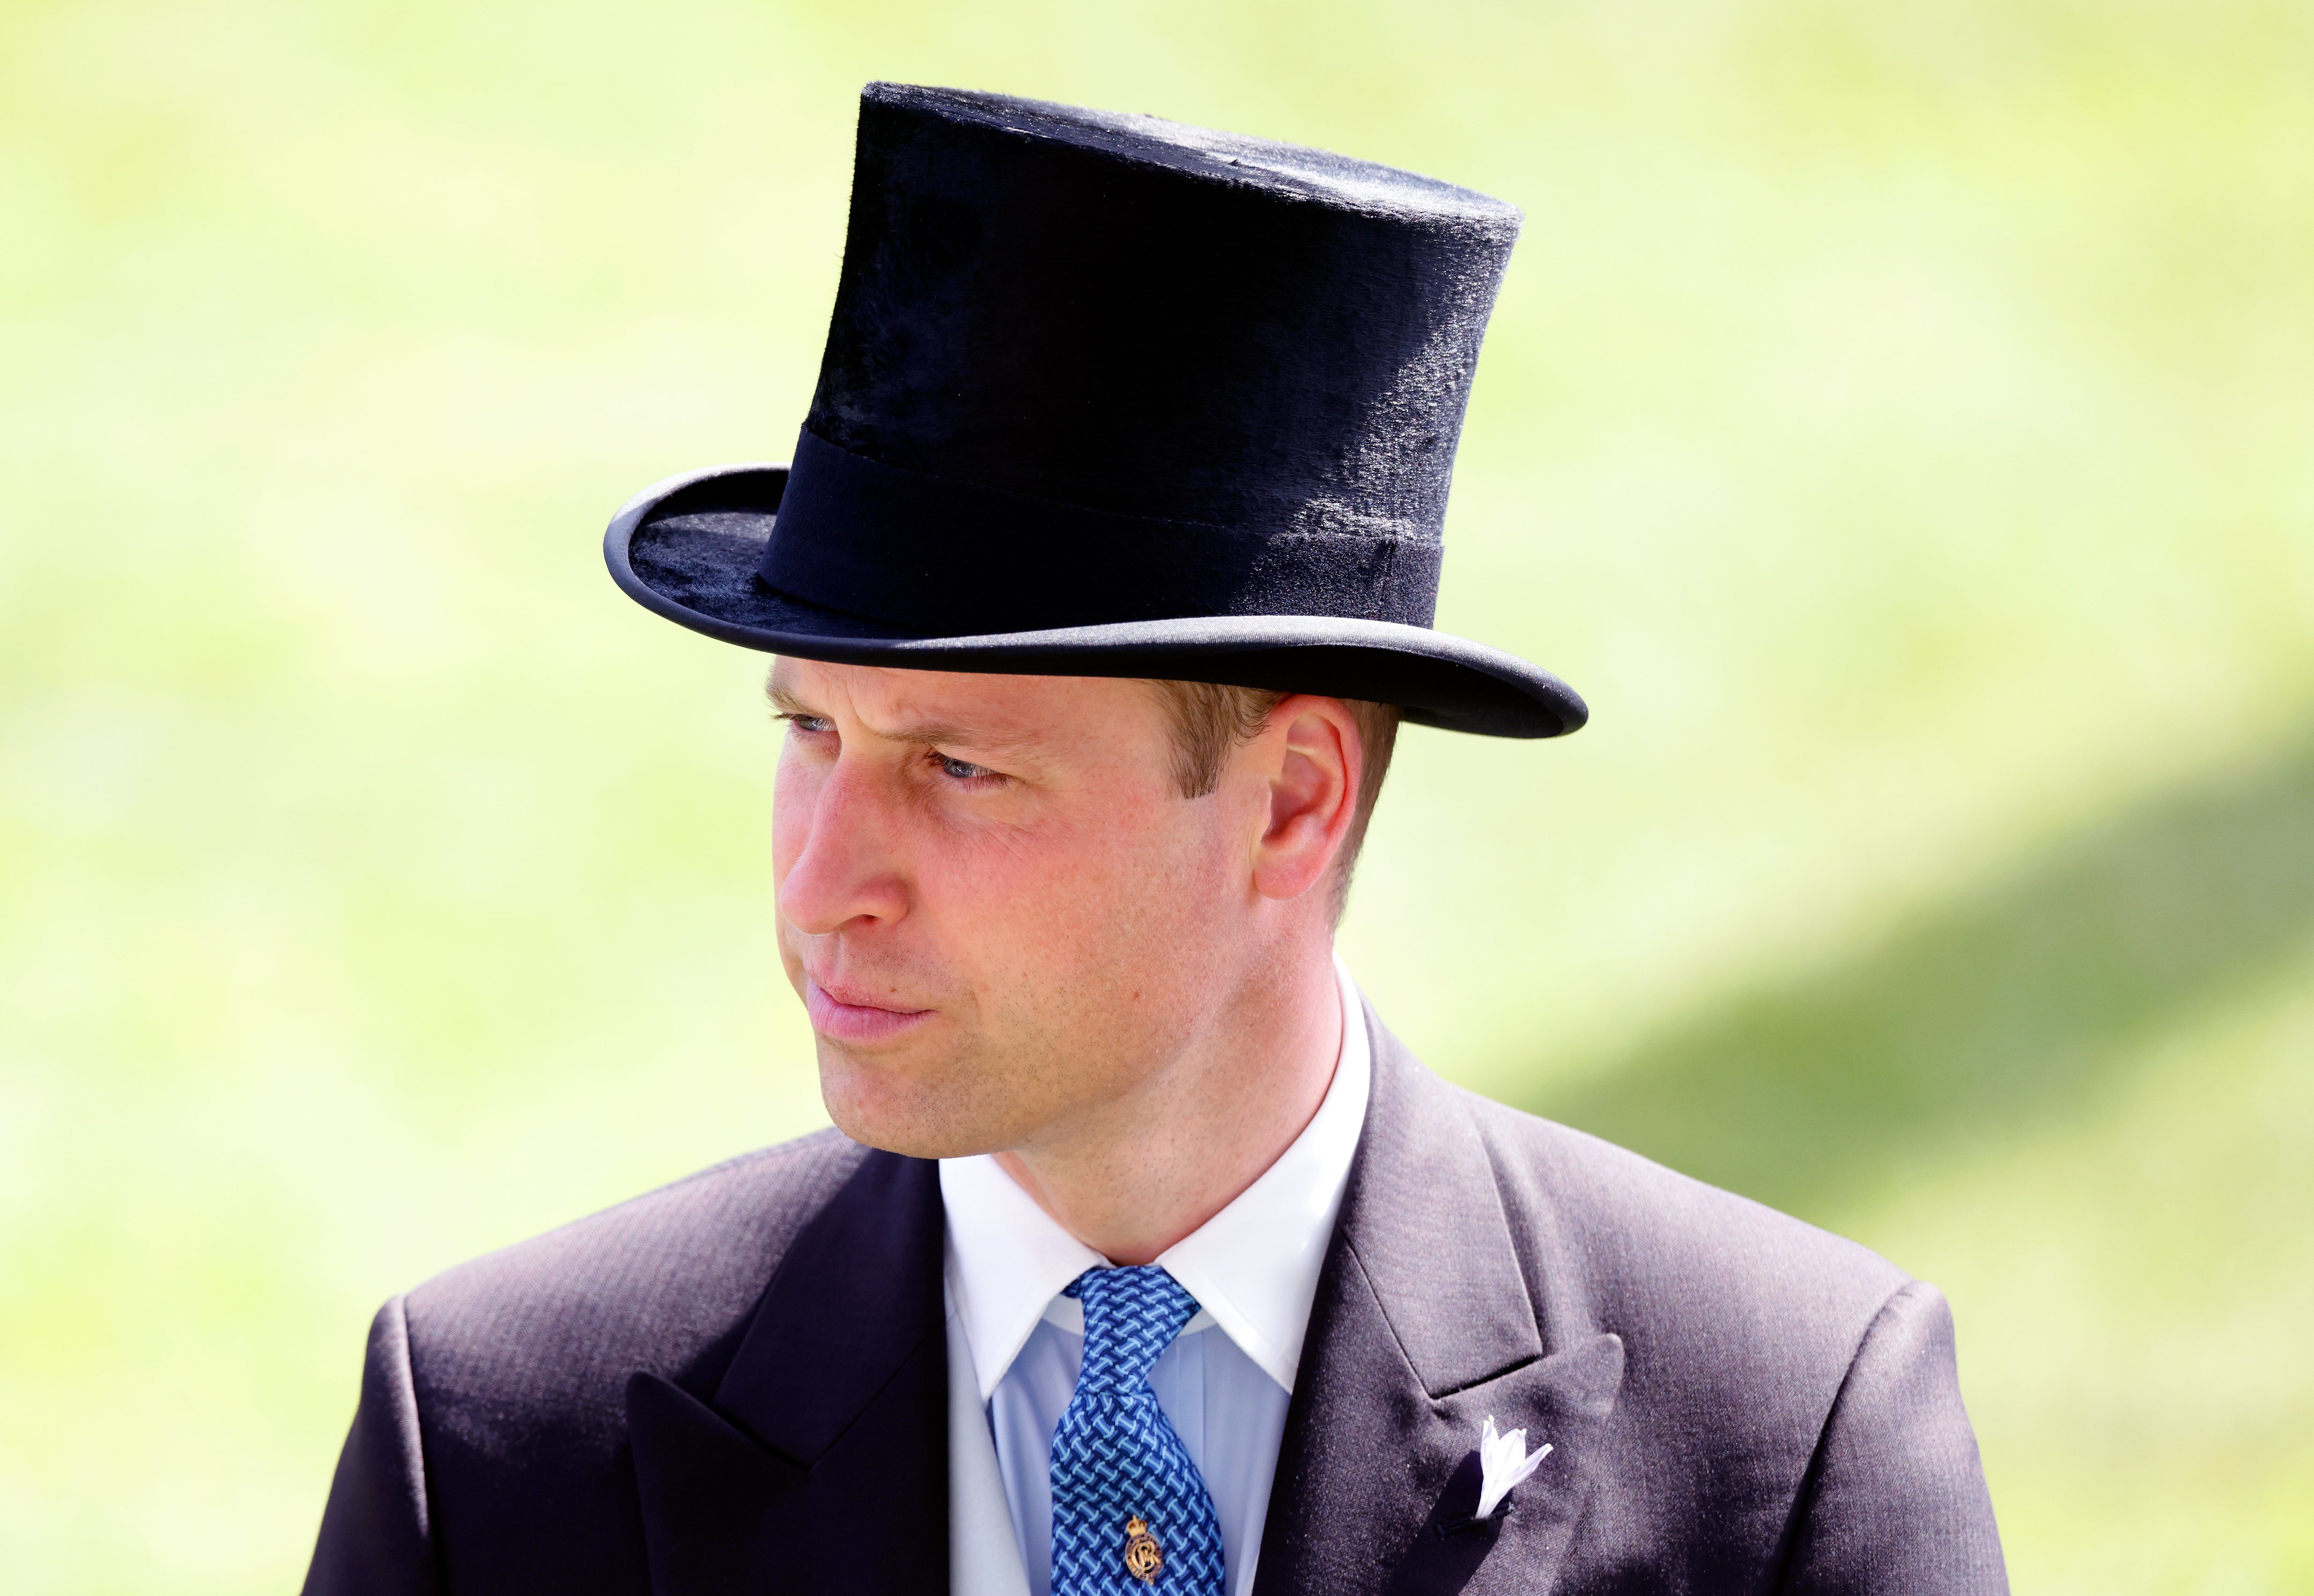     Prince William, Duke of Cambridge during day four of Royal Ascot at Ascot Racecourse on June 17, 2022 in Ascot, England.  / Source: Getty Images